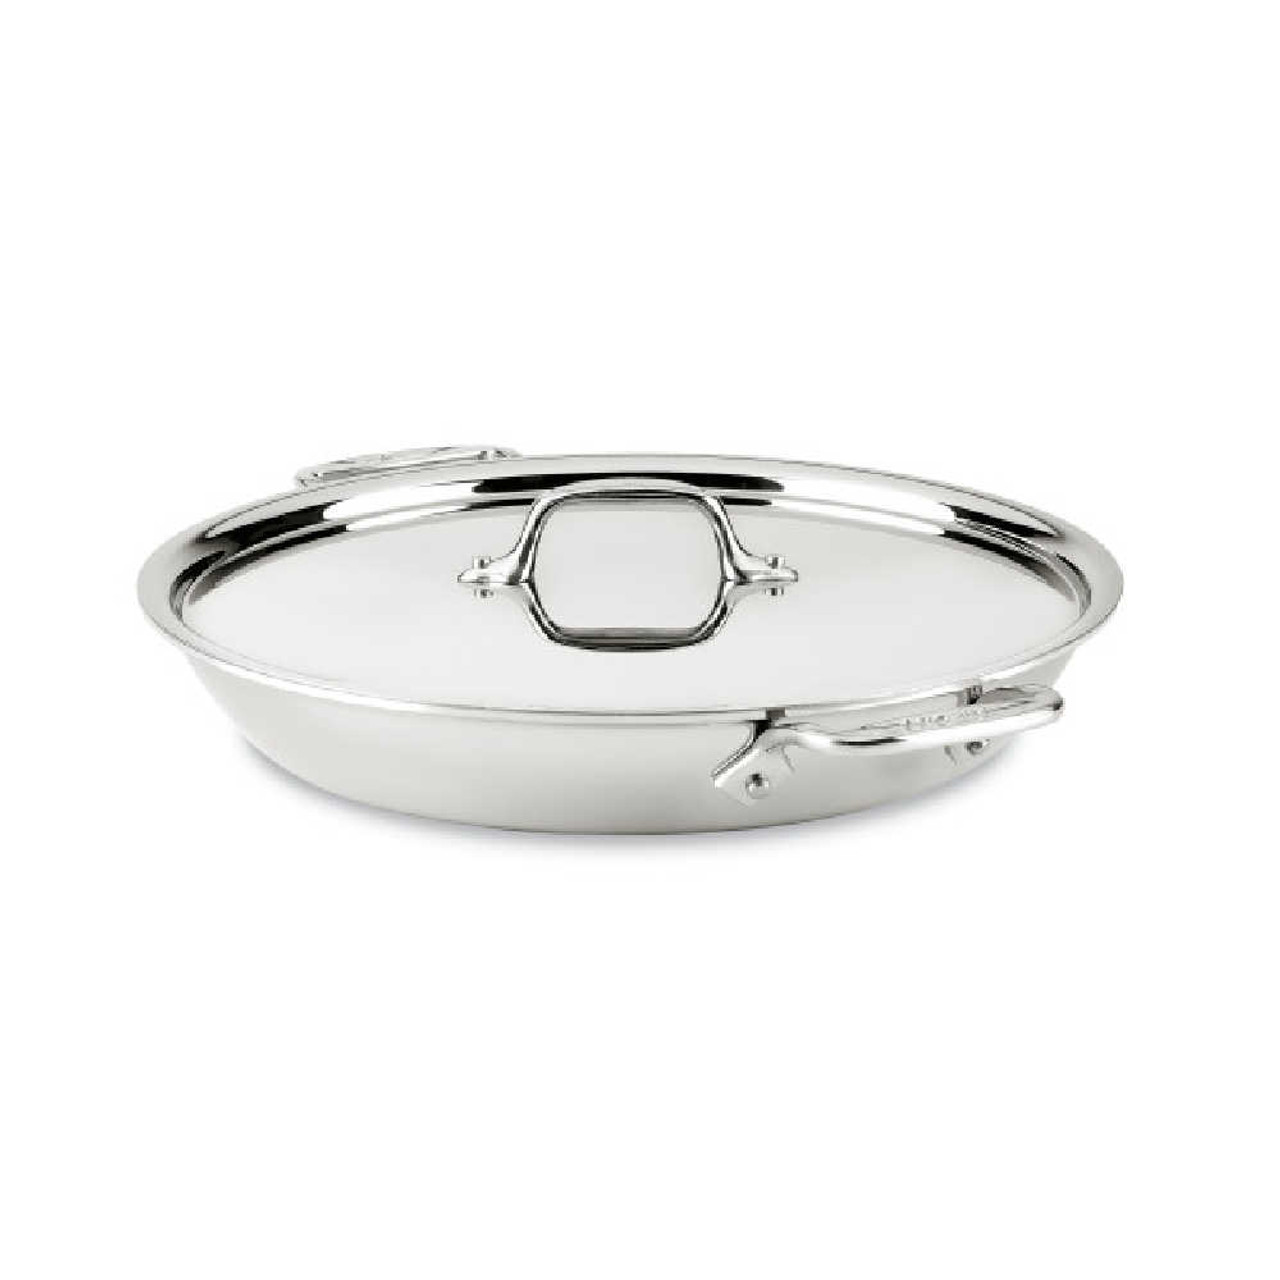 All-Clad d3 Stainless 4-Qt. Weeknight Pan with Lid + Reviews